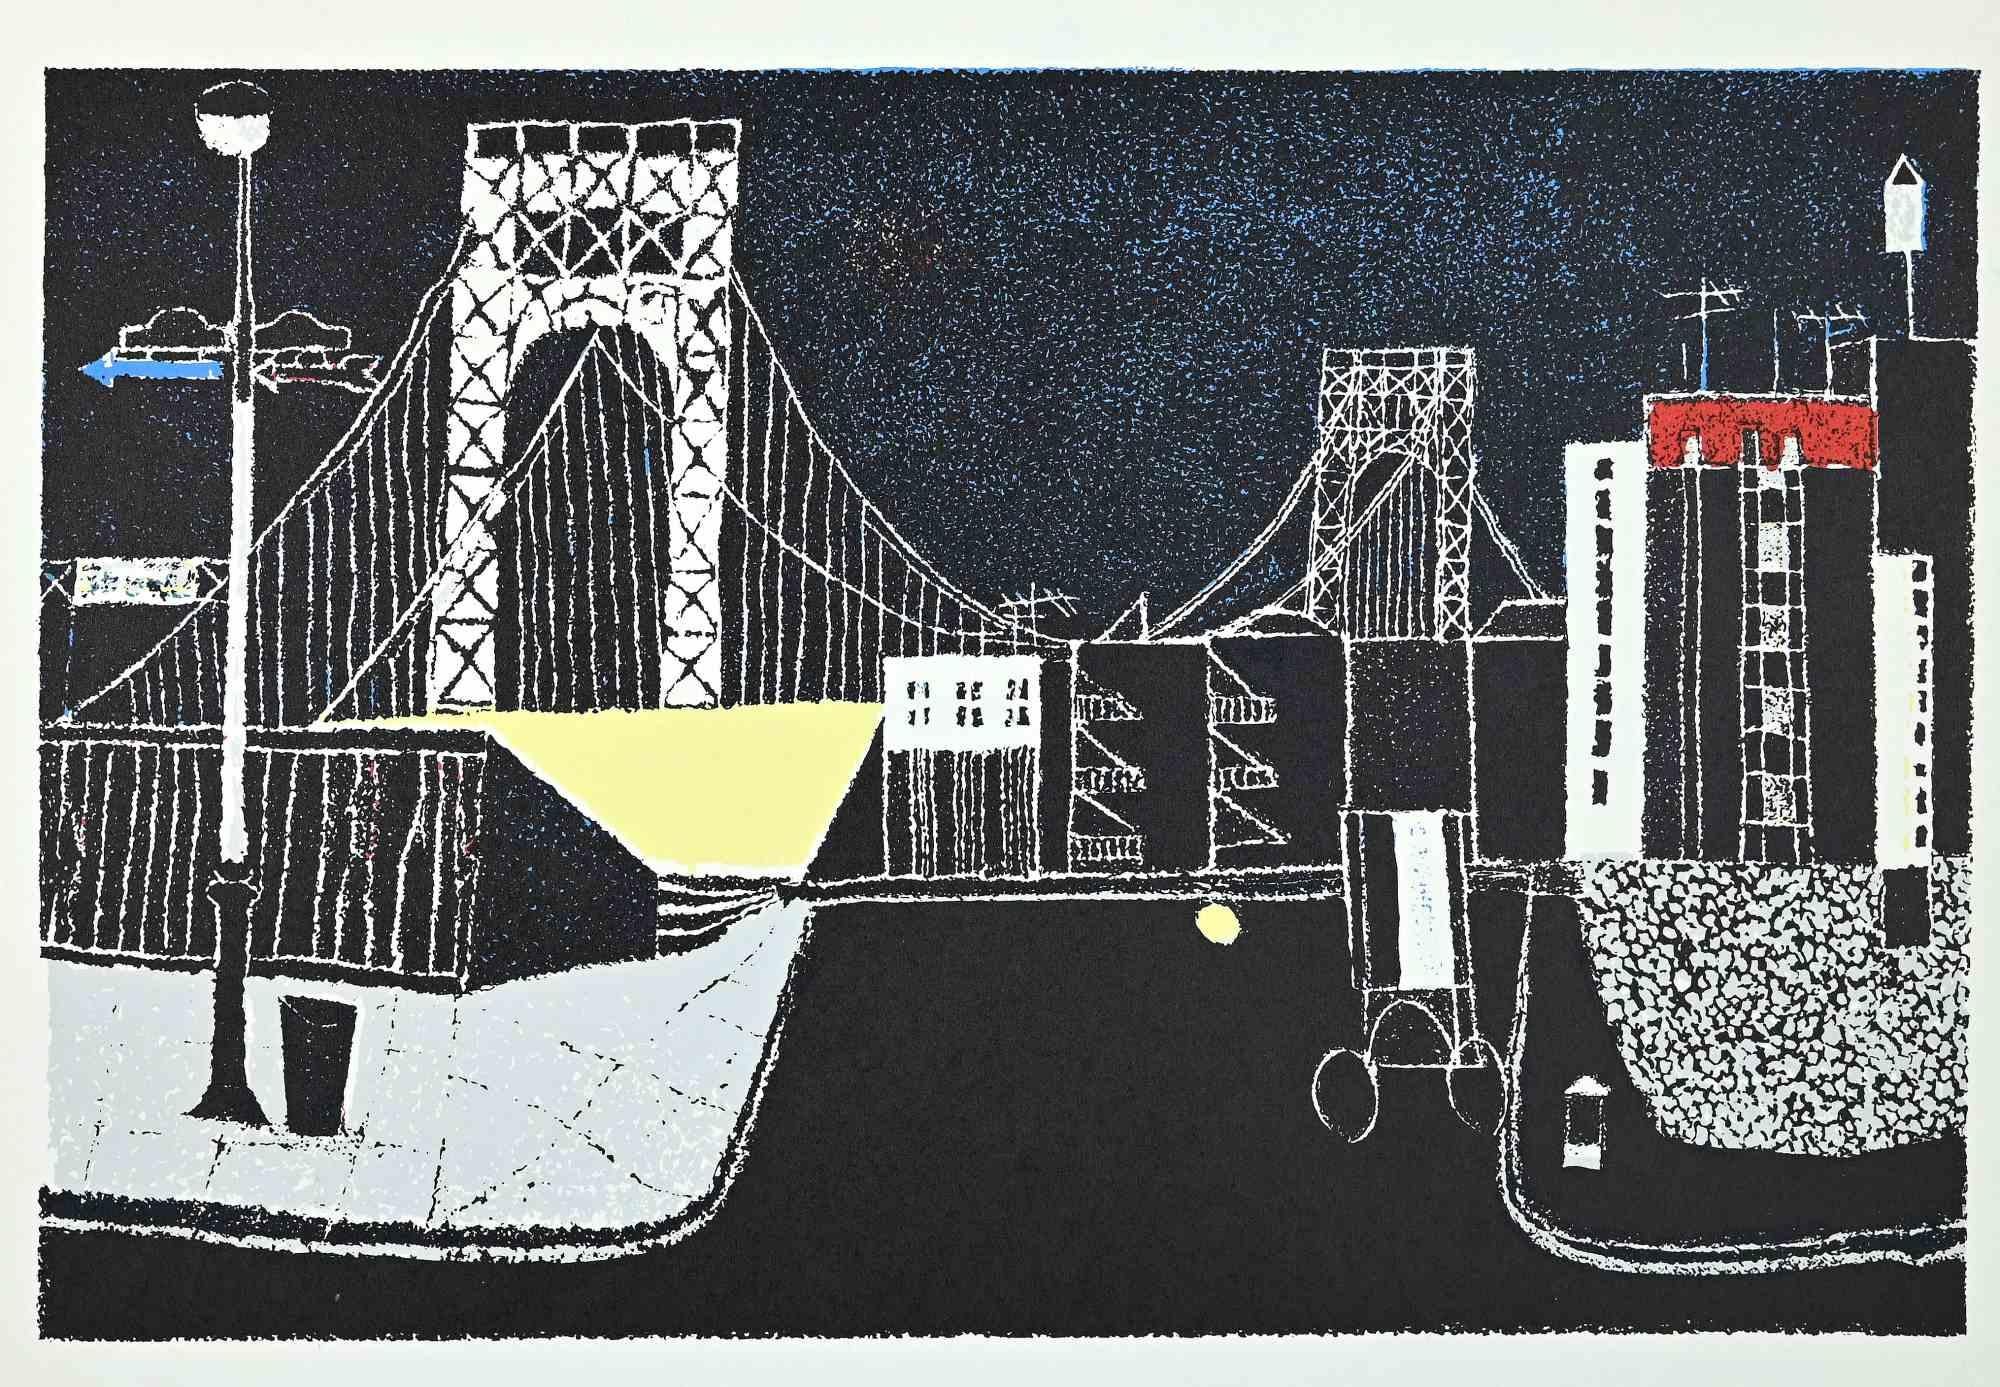 The bridge is an original Vintage Offset Print on ivory-colored paper, realized by Franco Gentilini (Italian Painter, 1909-1981) in the 1970s.

The state of preservation of the artwork is excellent.

Franco Gentilini ( Italian Painter, 1909-1981):